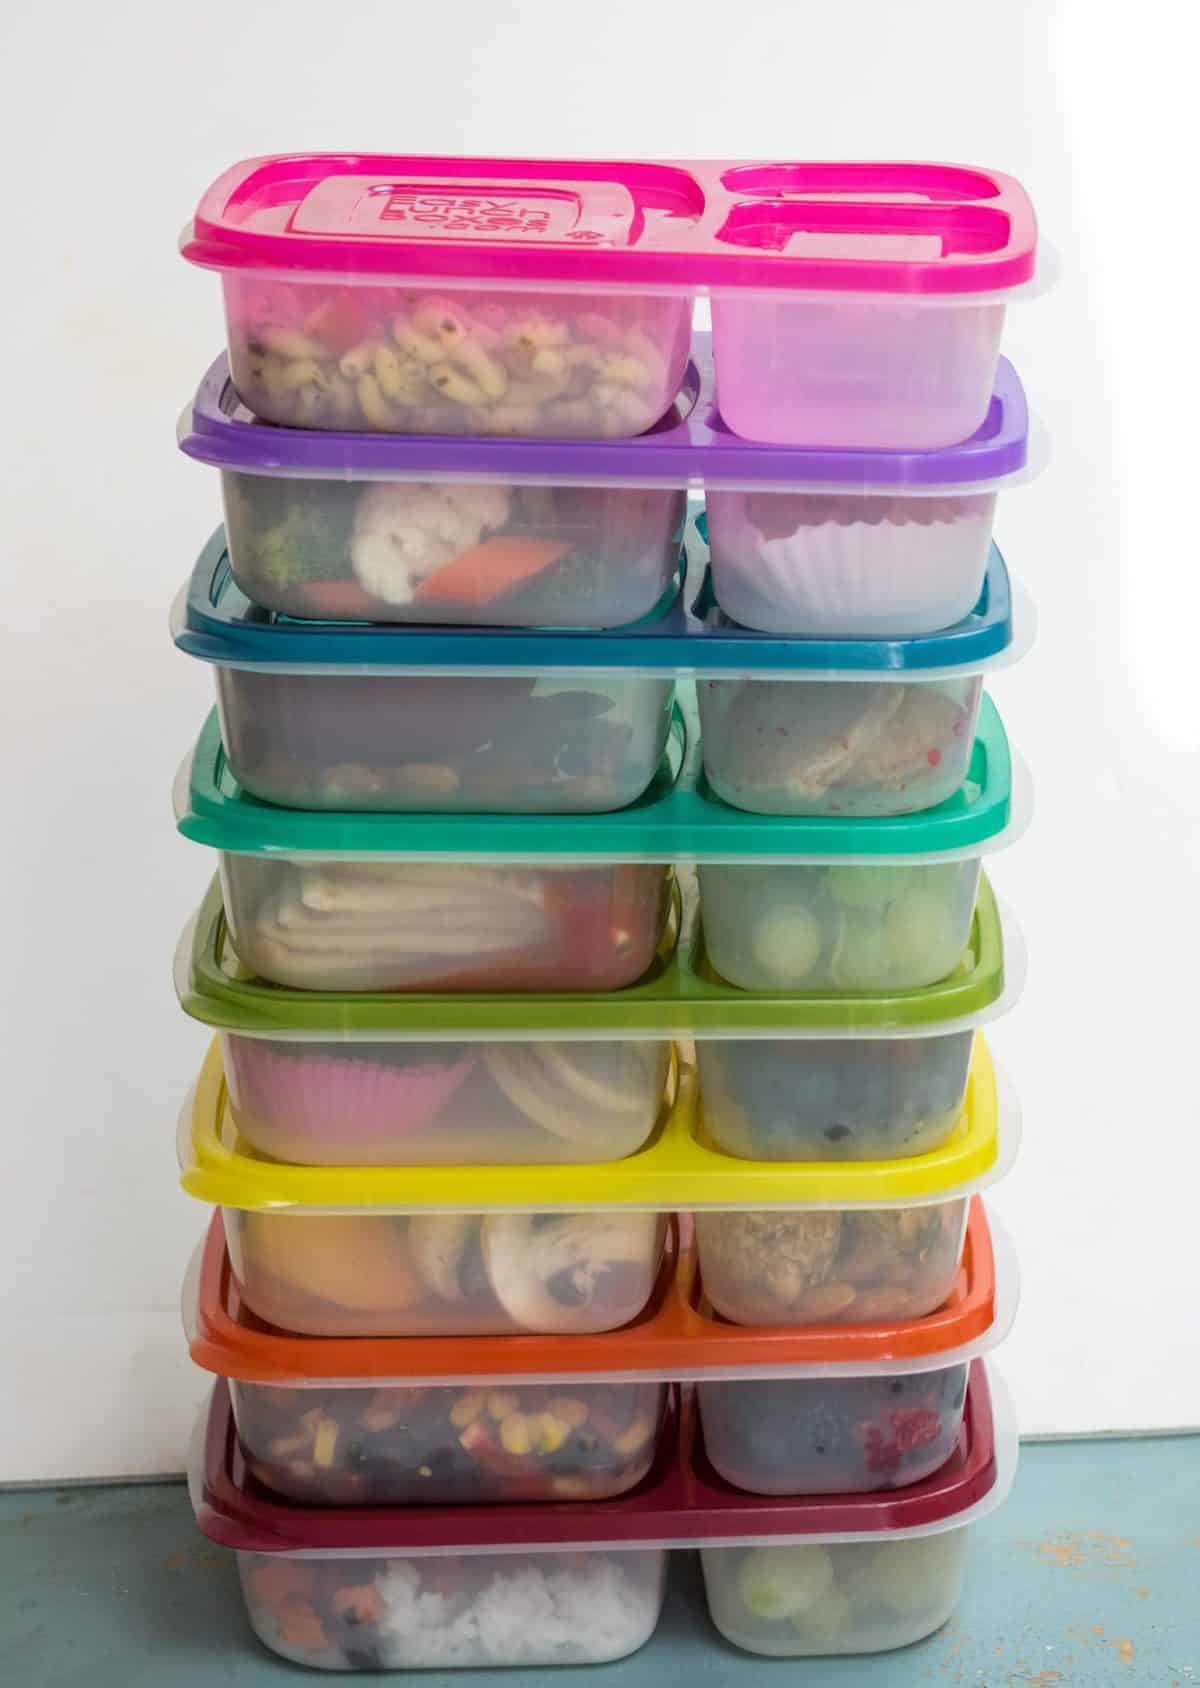 125 Healthy Lunchbox Ideas for Kids